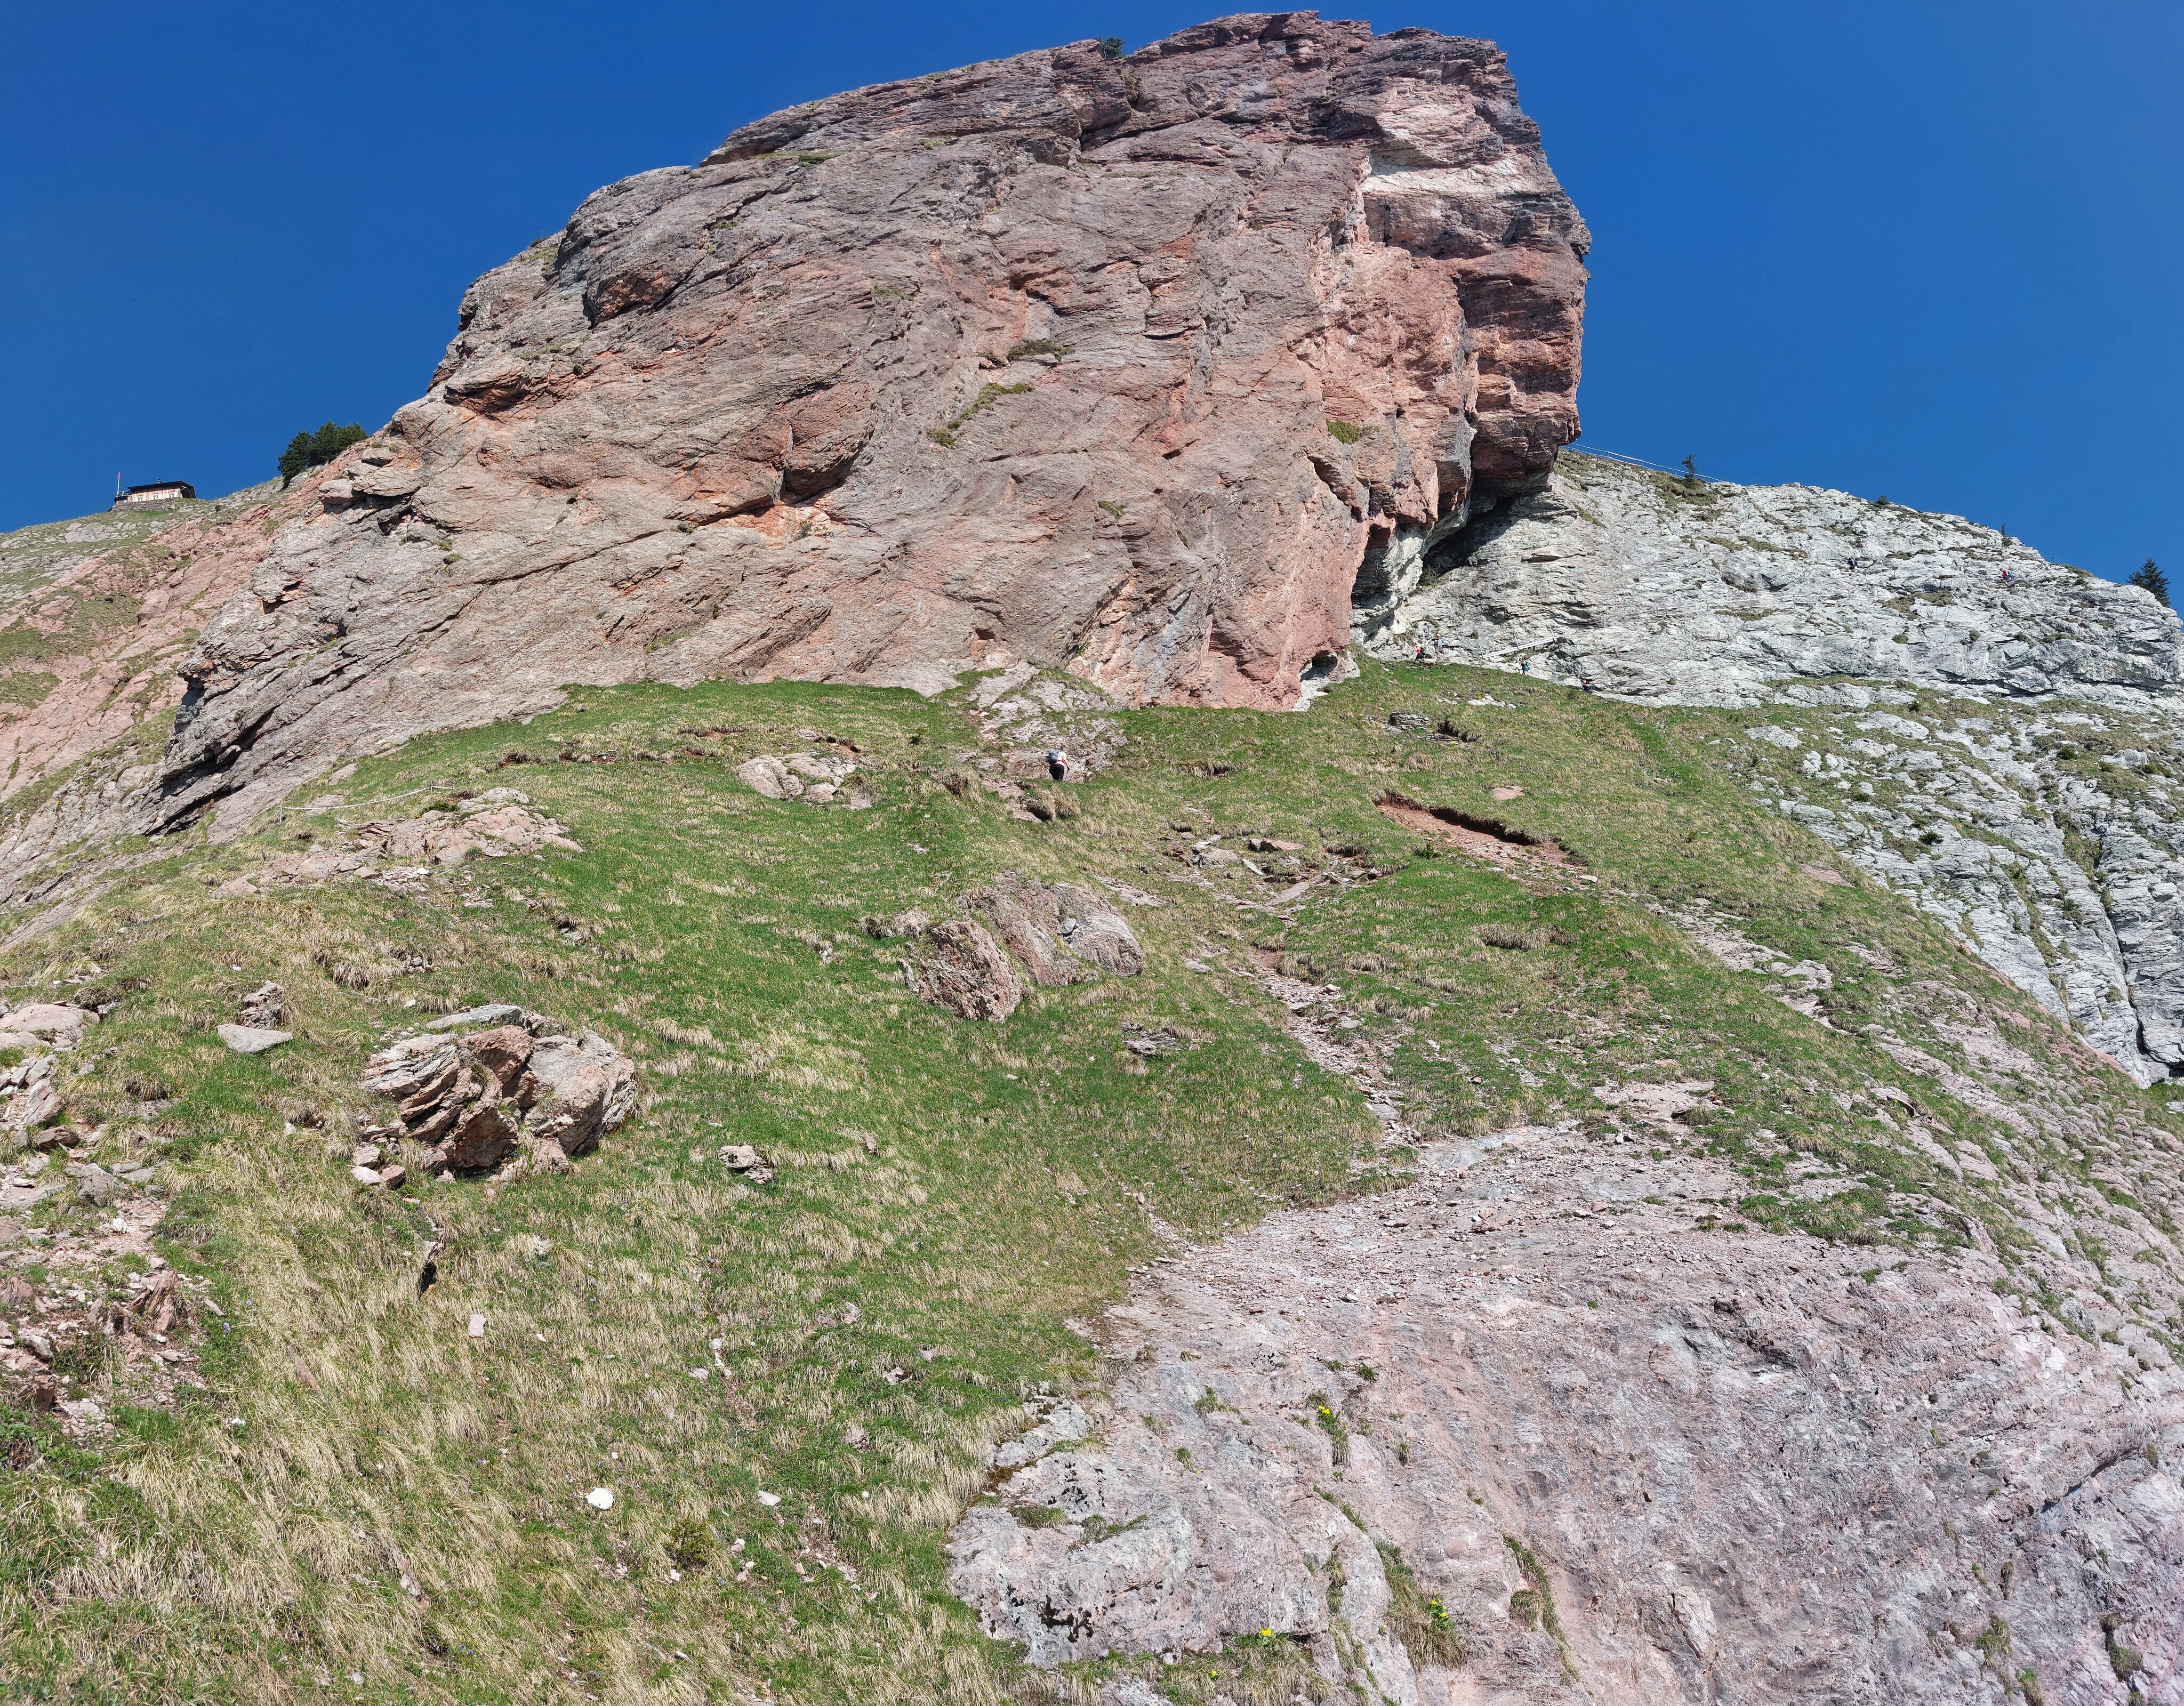 Looking up at spar of red rock and summit